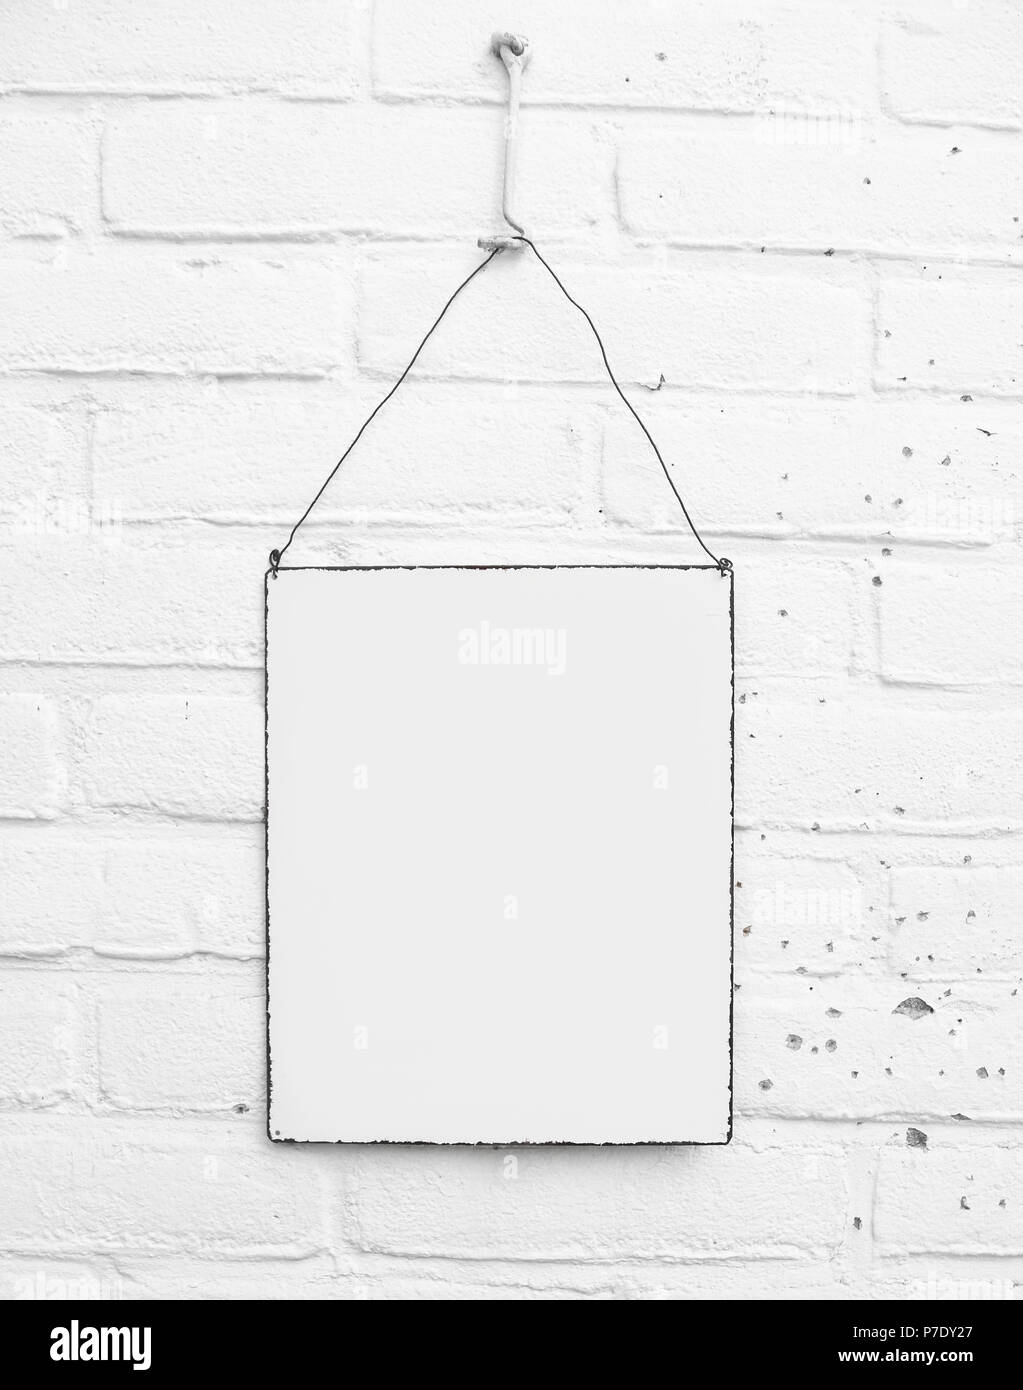 White square metal banner paper on white brick wall background - mock up - template with space for own text Stock Photo